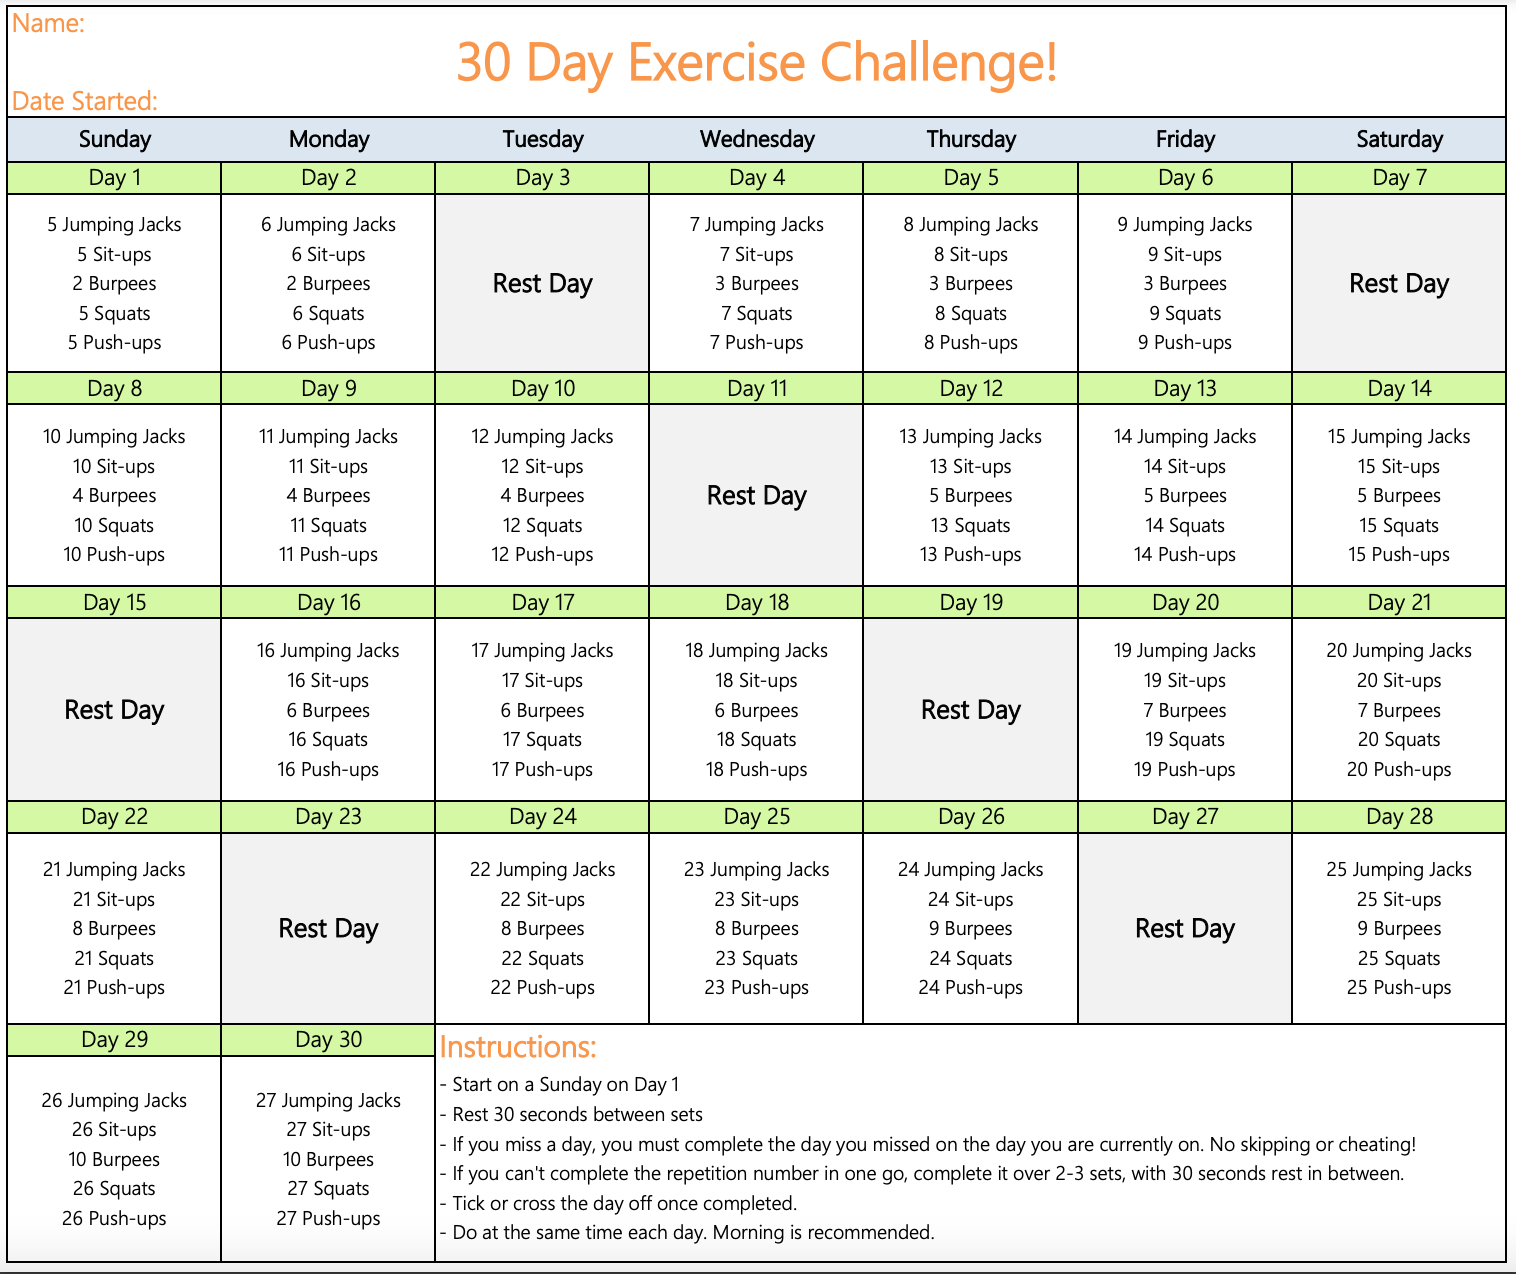 30 Day Exercise Challenge - Natural Health Connections